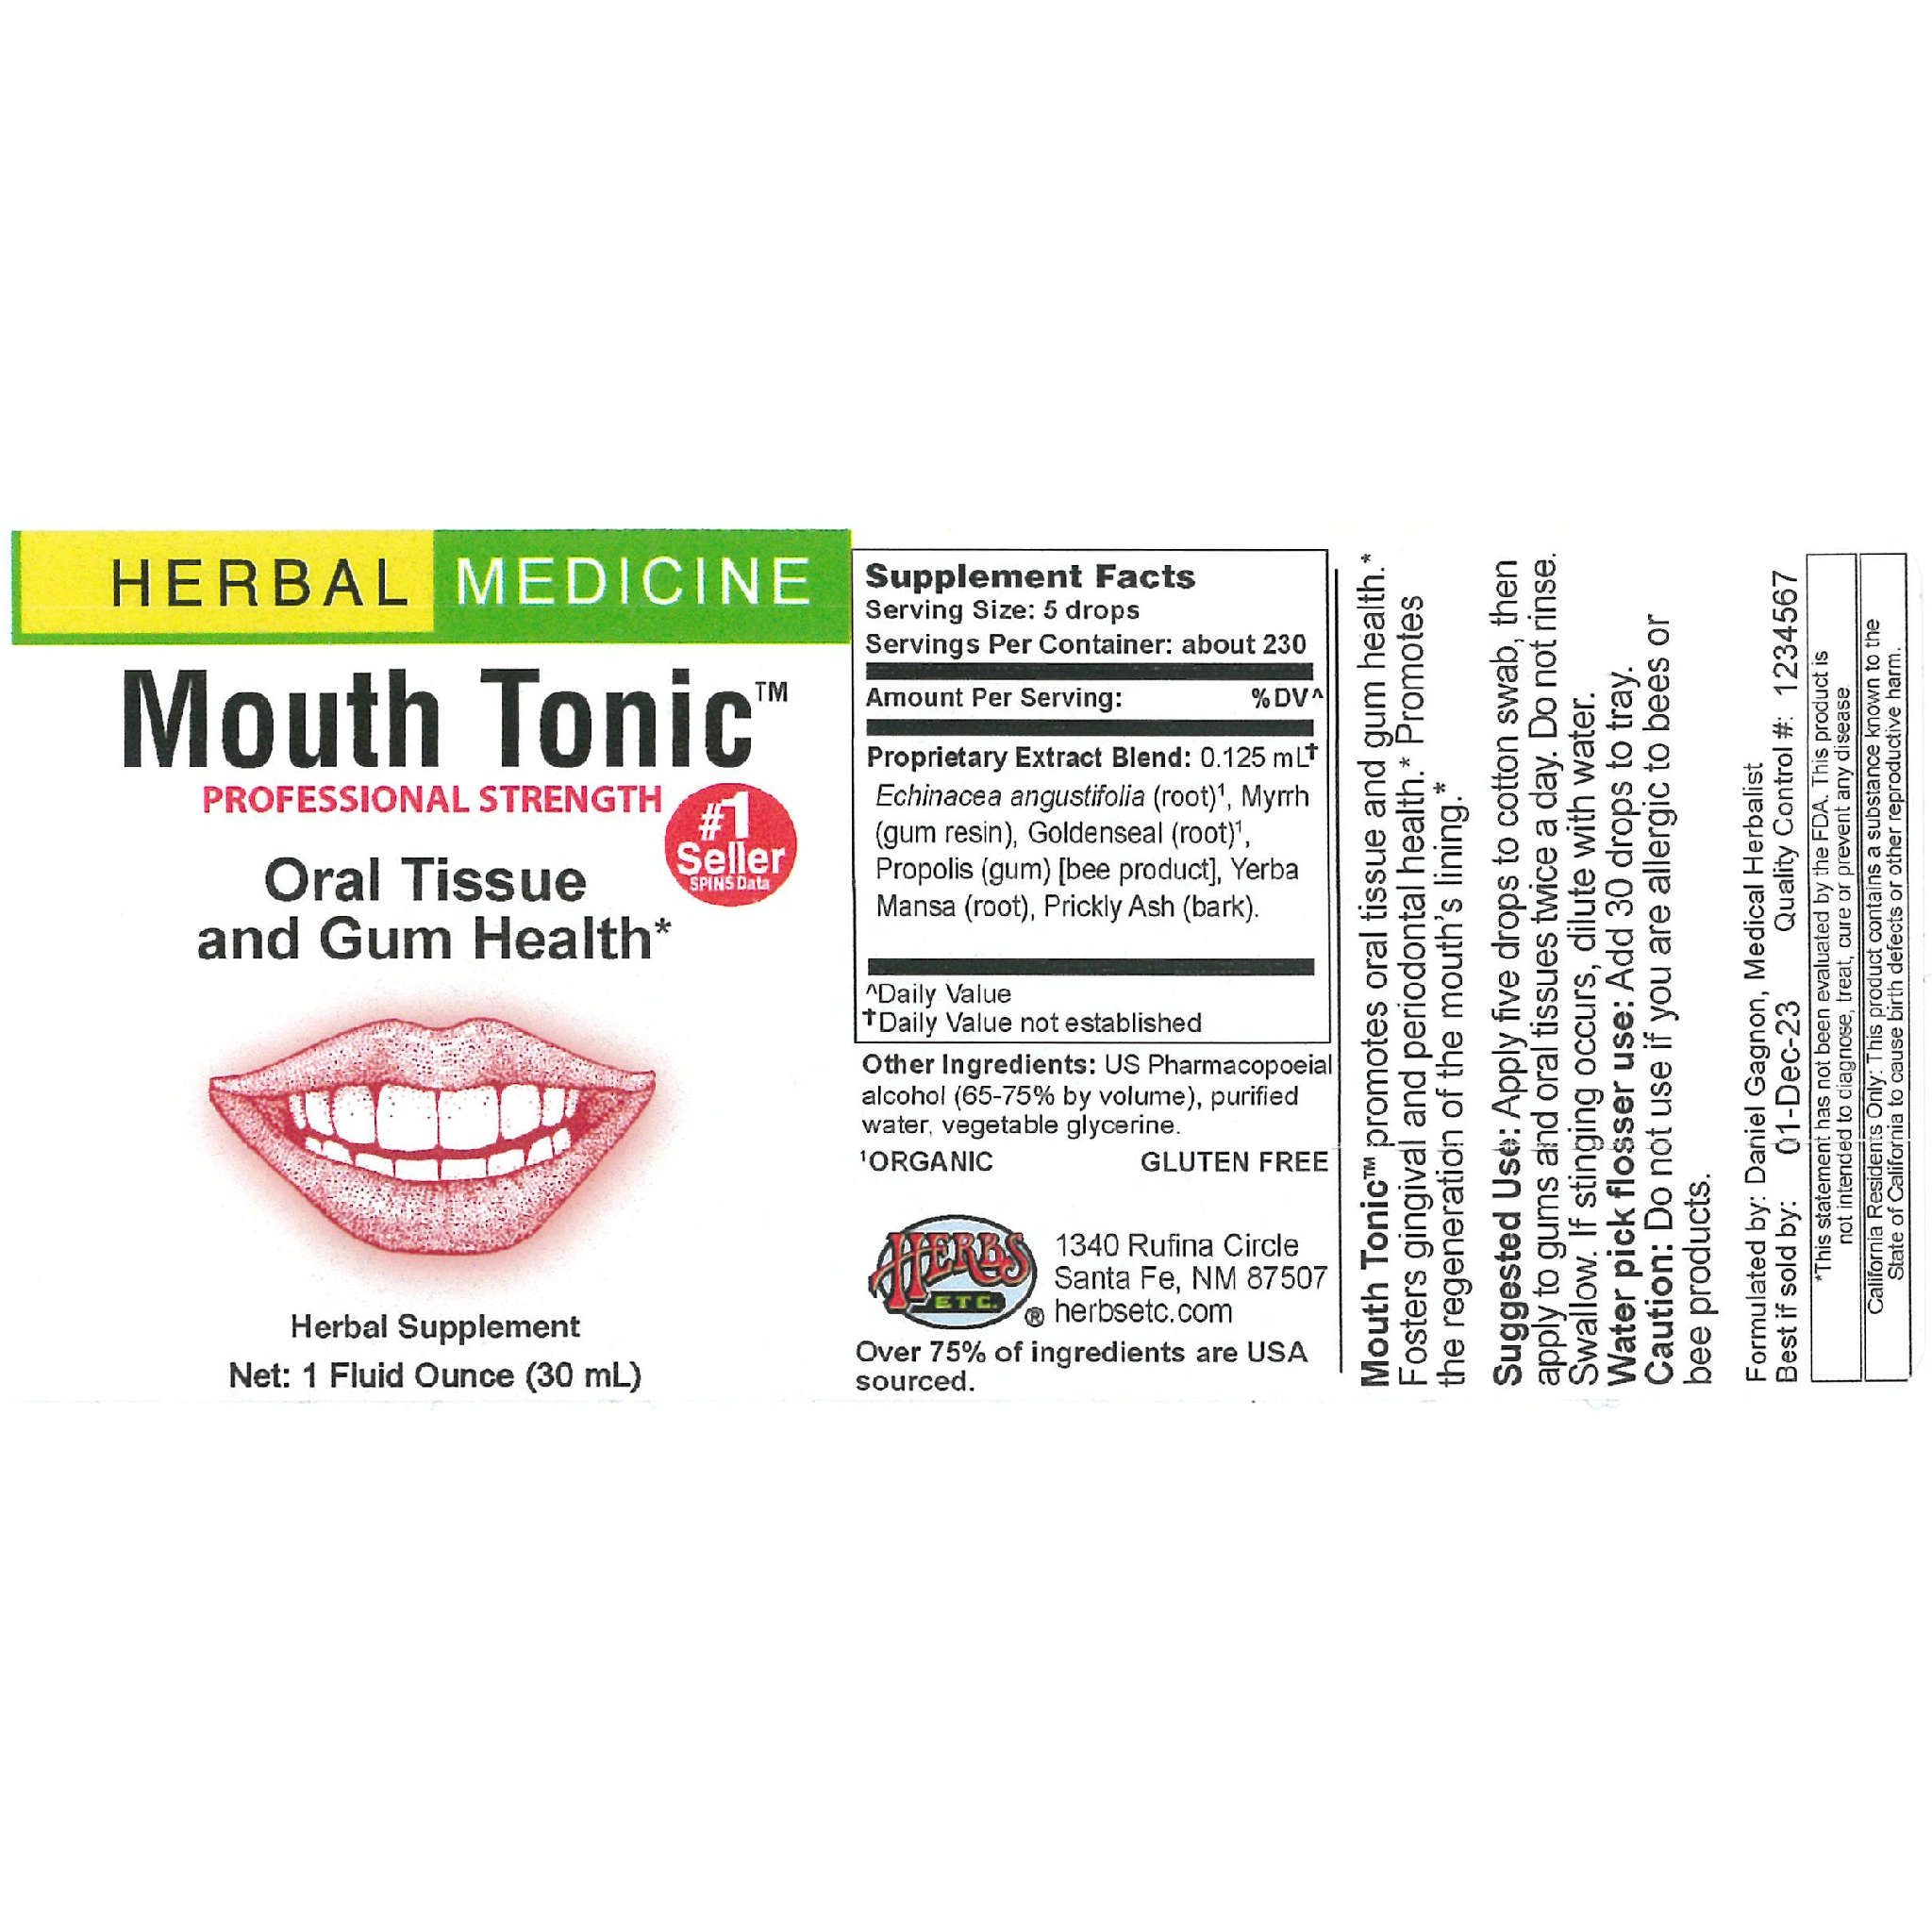 Herbs Etc - Mouth Tonic